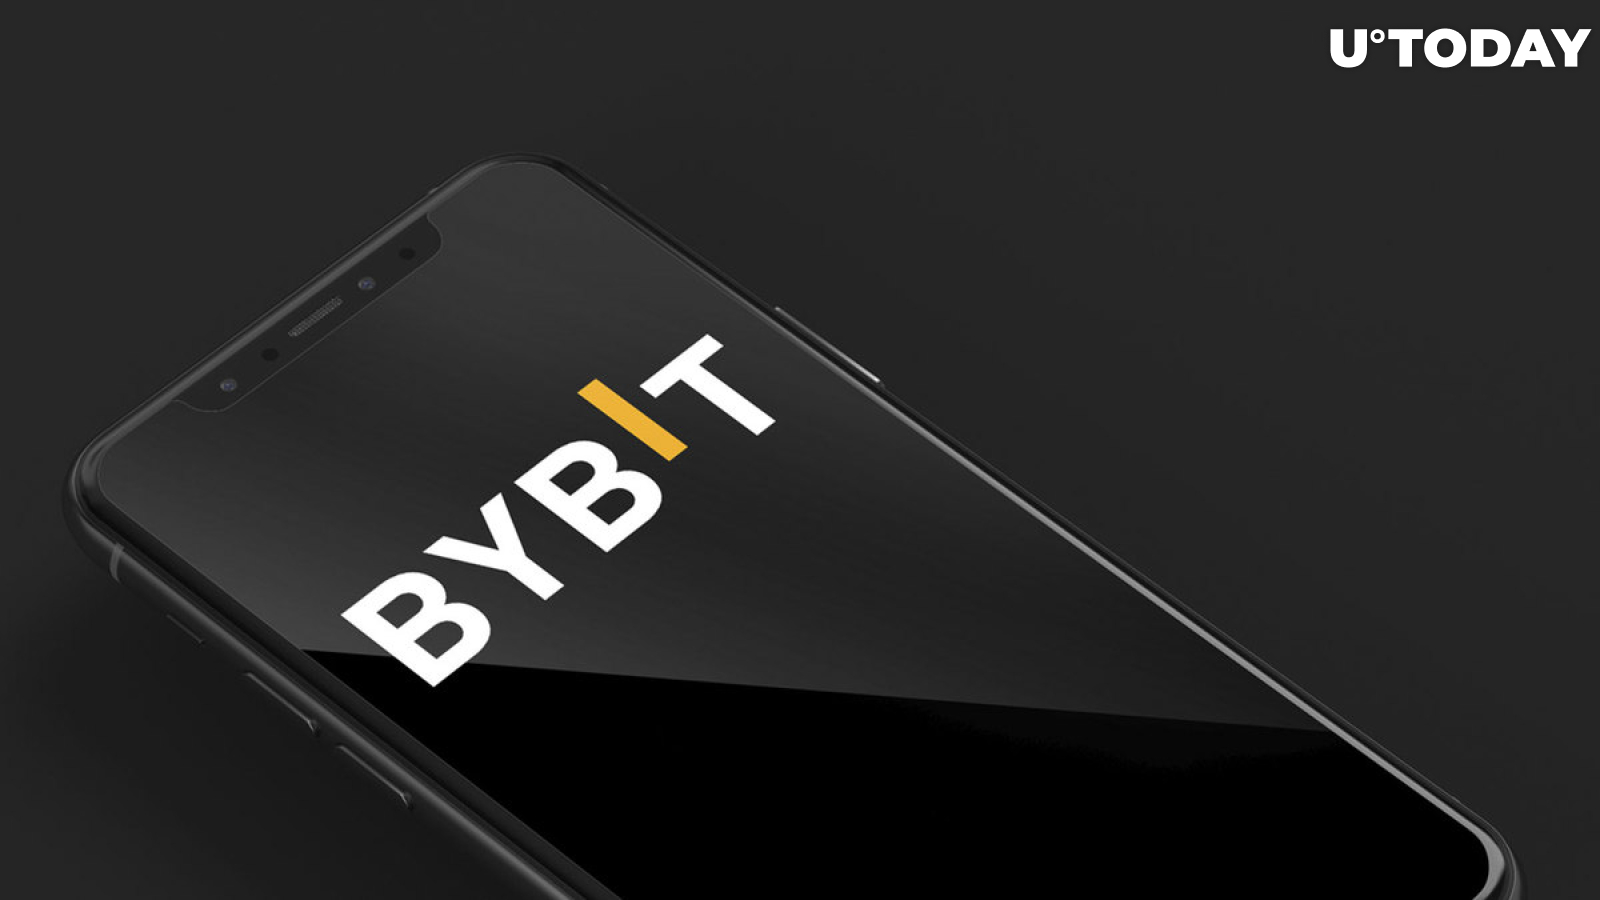 Bybit Launches Unified Account to Streamline Trading Experience for Investors